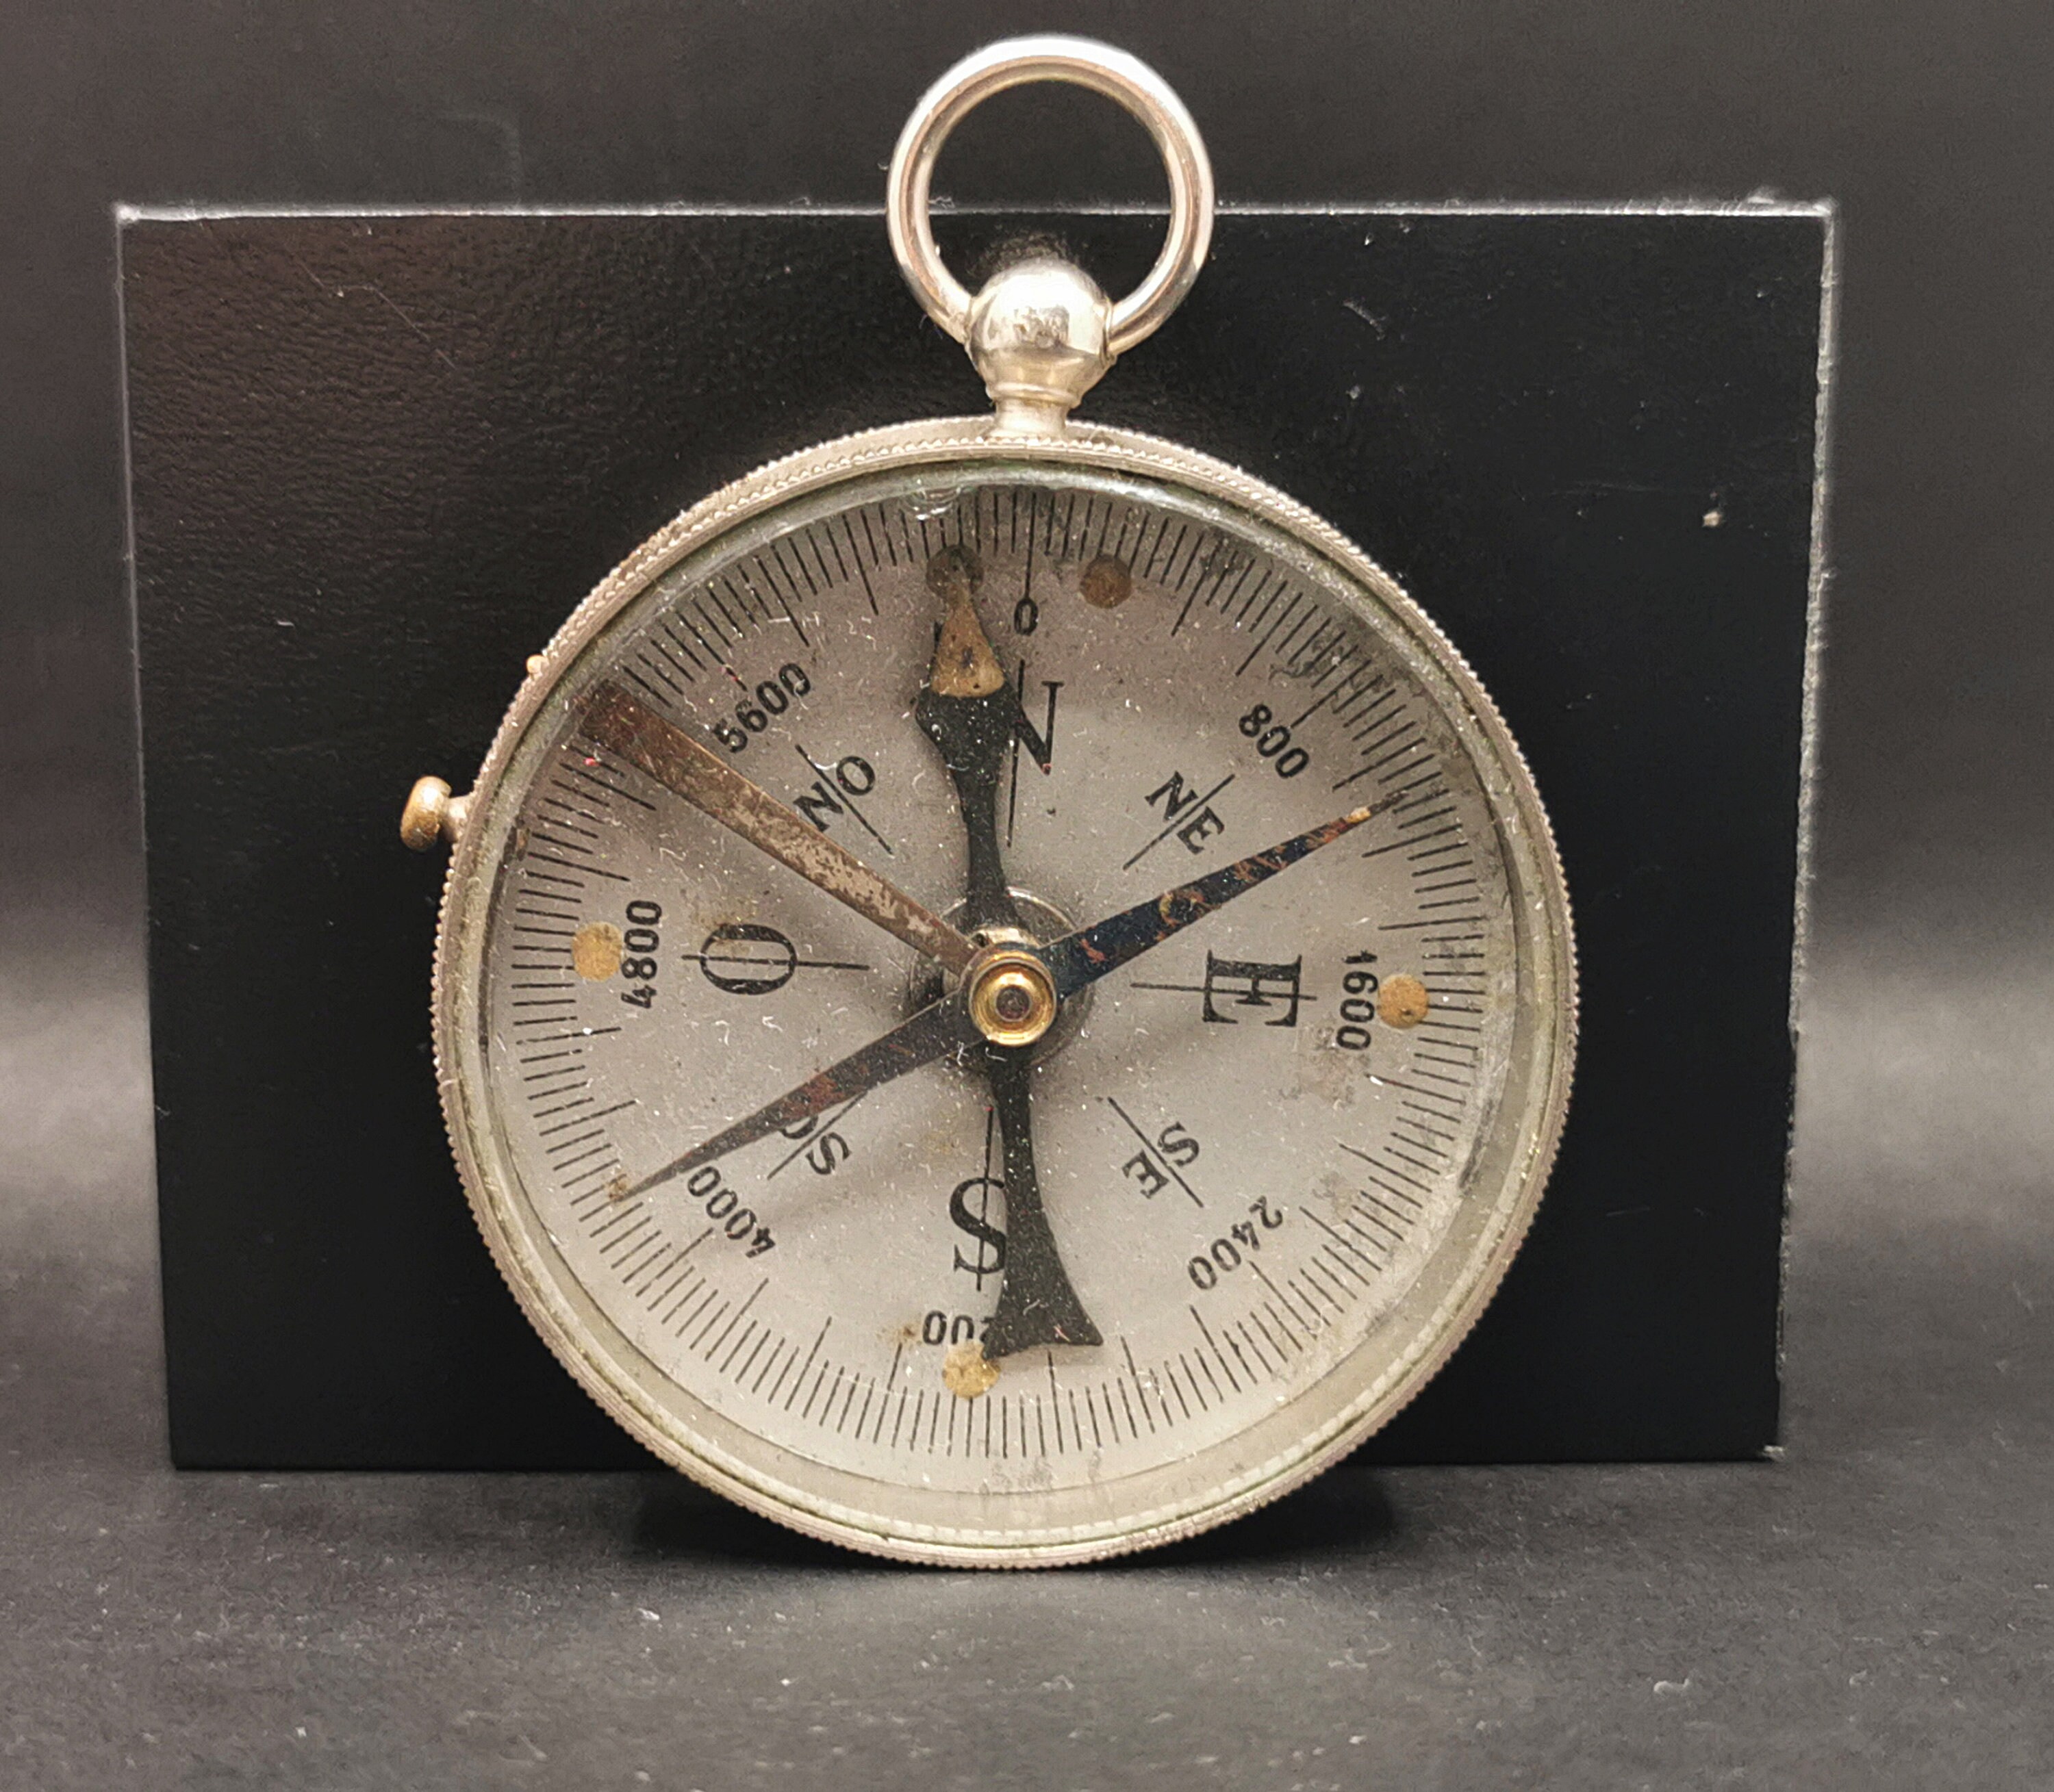 Details about   Vintage Military Nautical Brass Compass Antique Collectible Decor Gift Item 